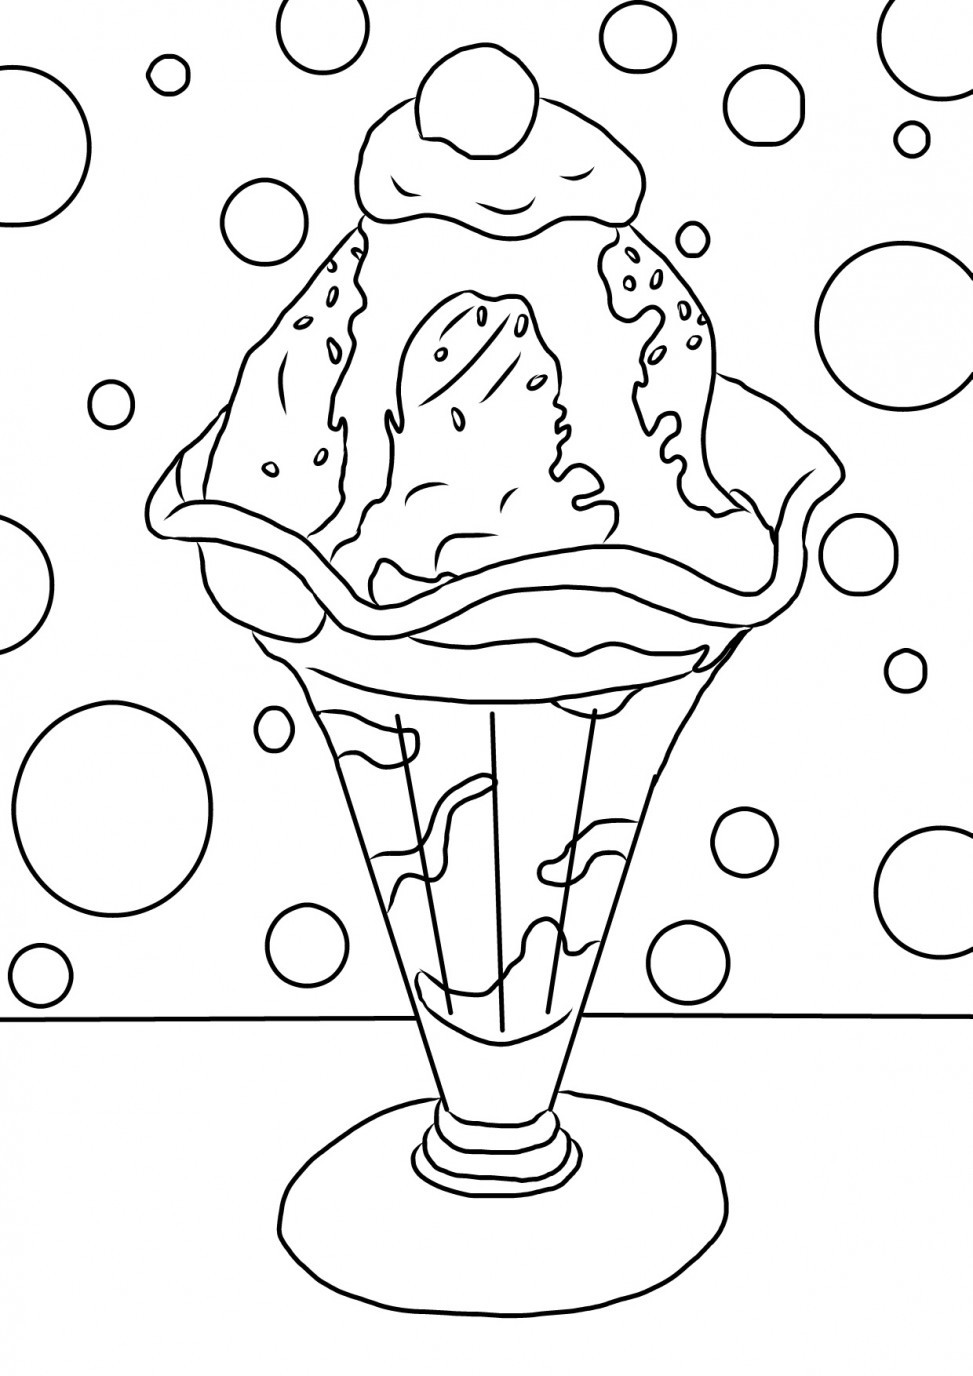 Coloring Sheets For Kids And Girls Printable Sundae
 Ice Cream Colouring Sheet Food